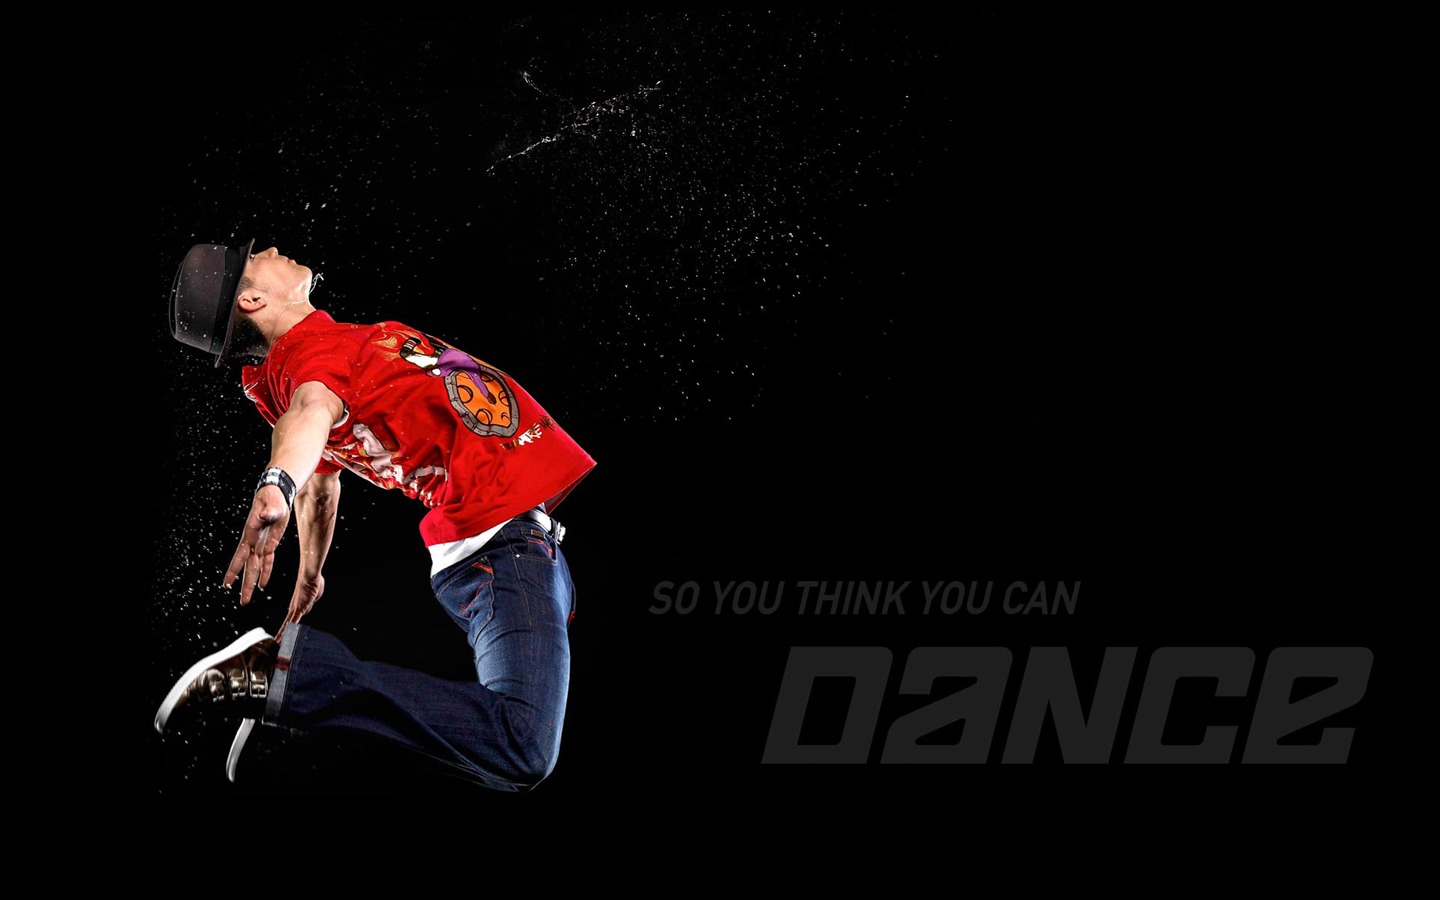 So You Think You Can Dance 舞林爭霸壁紙(一) #6 - 1440x900